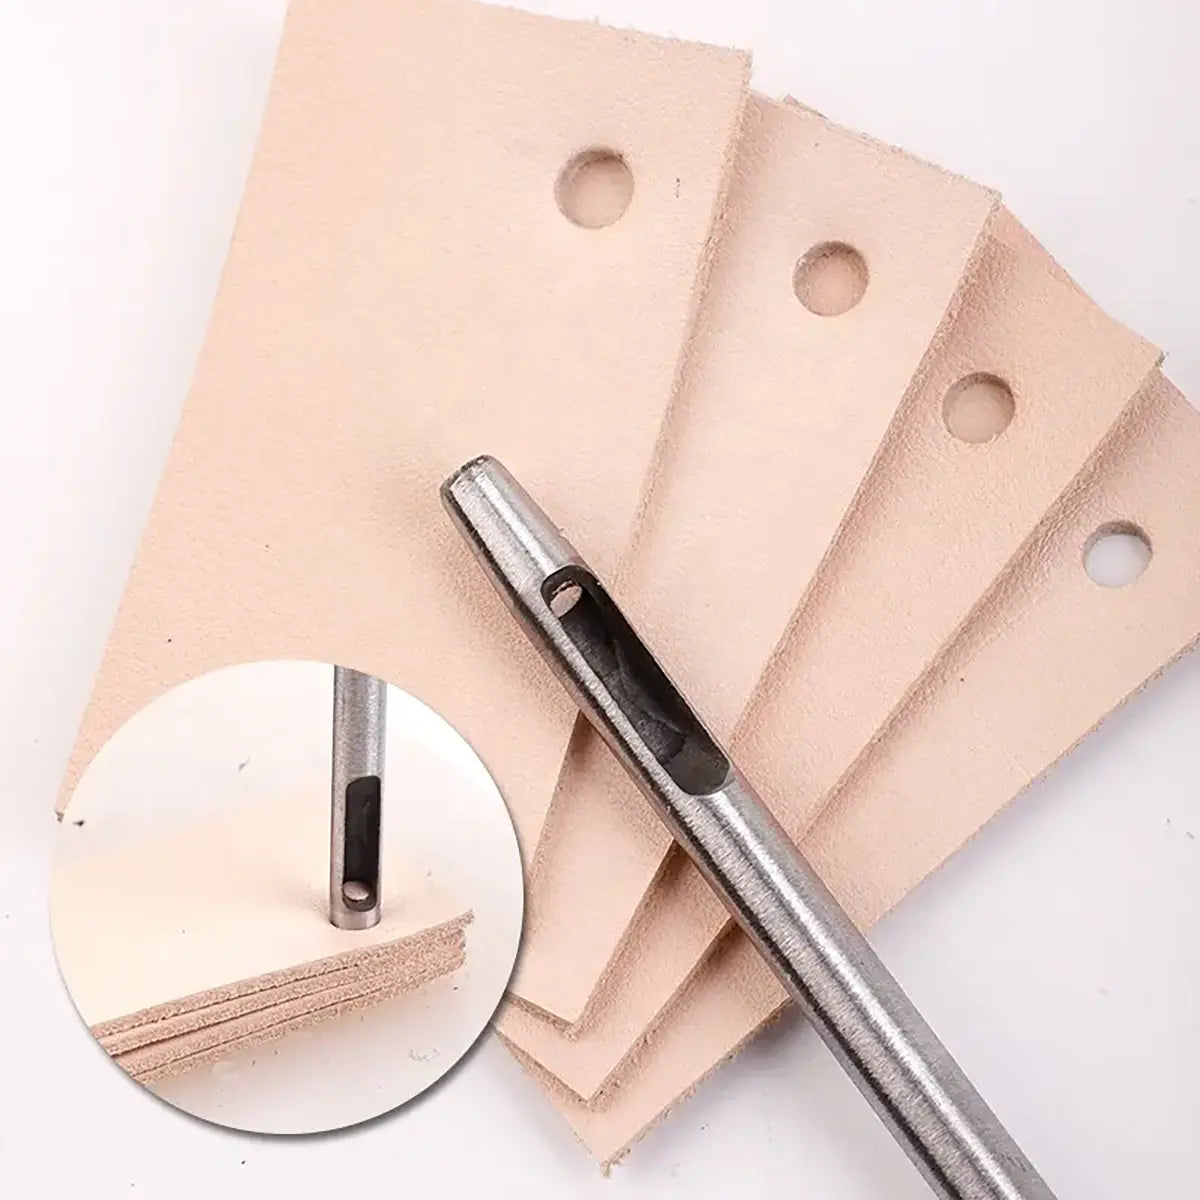 Stainless Small Hole Punch 13 Piece Set